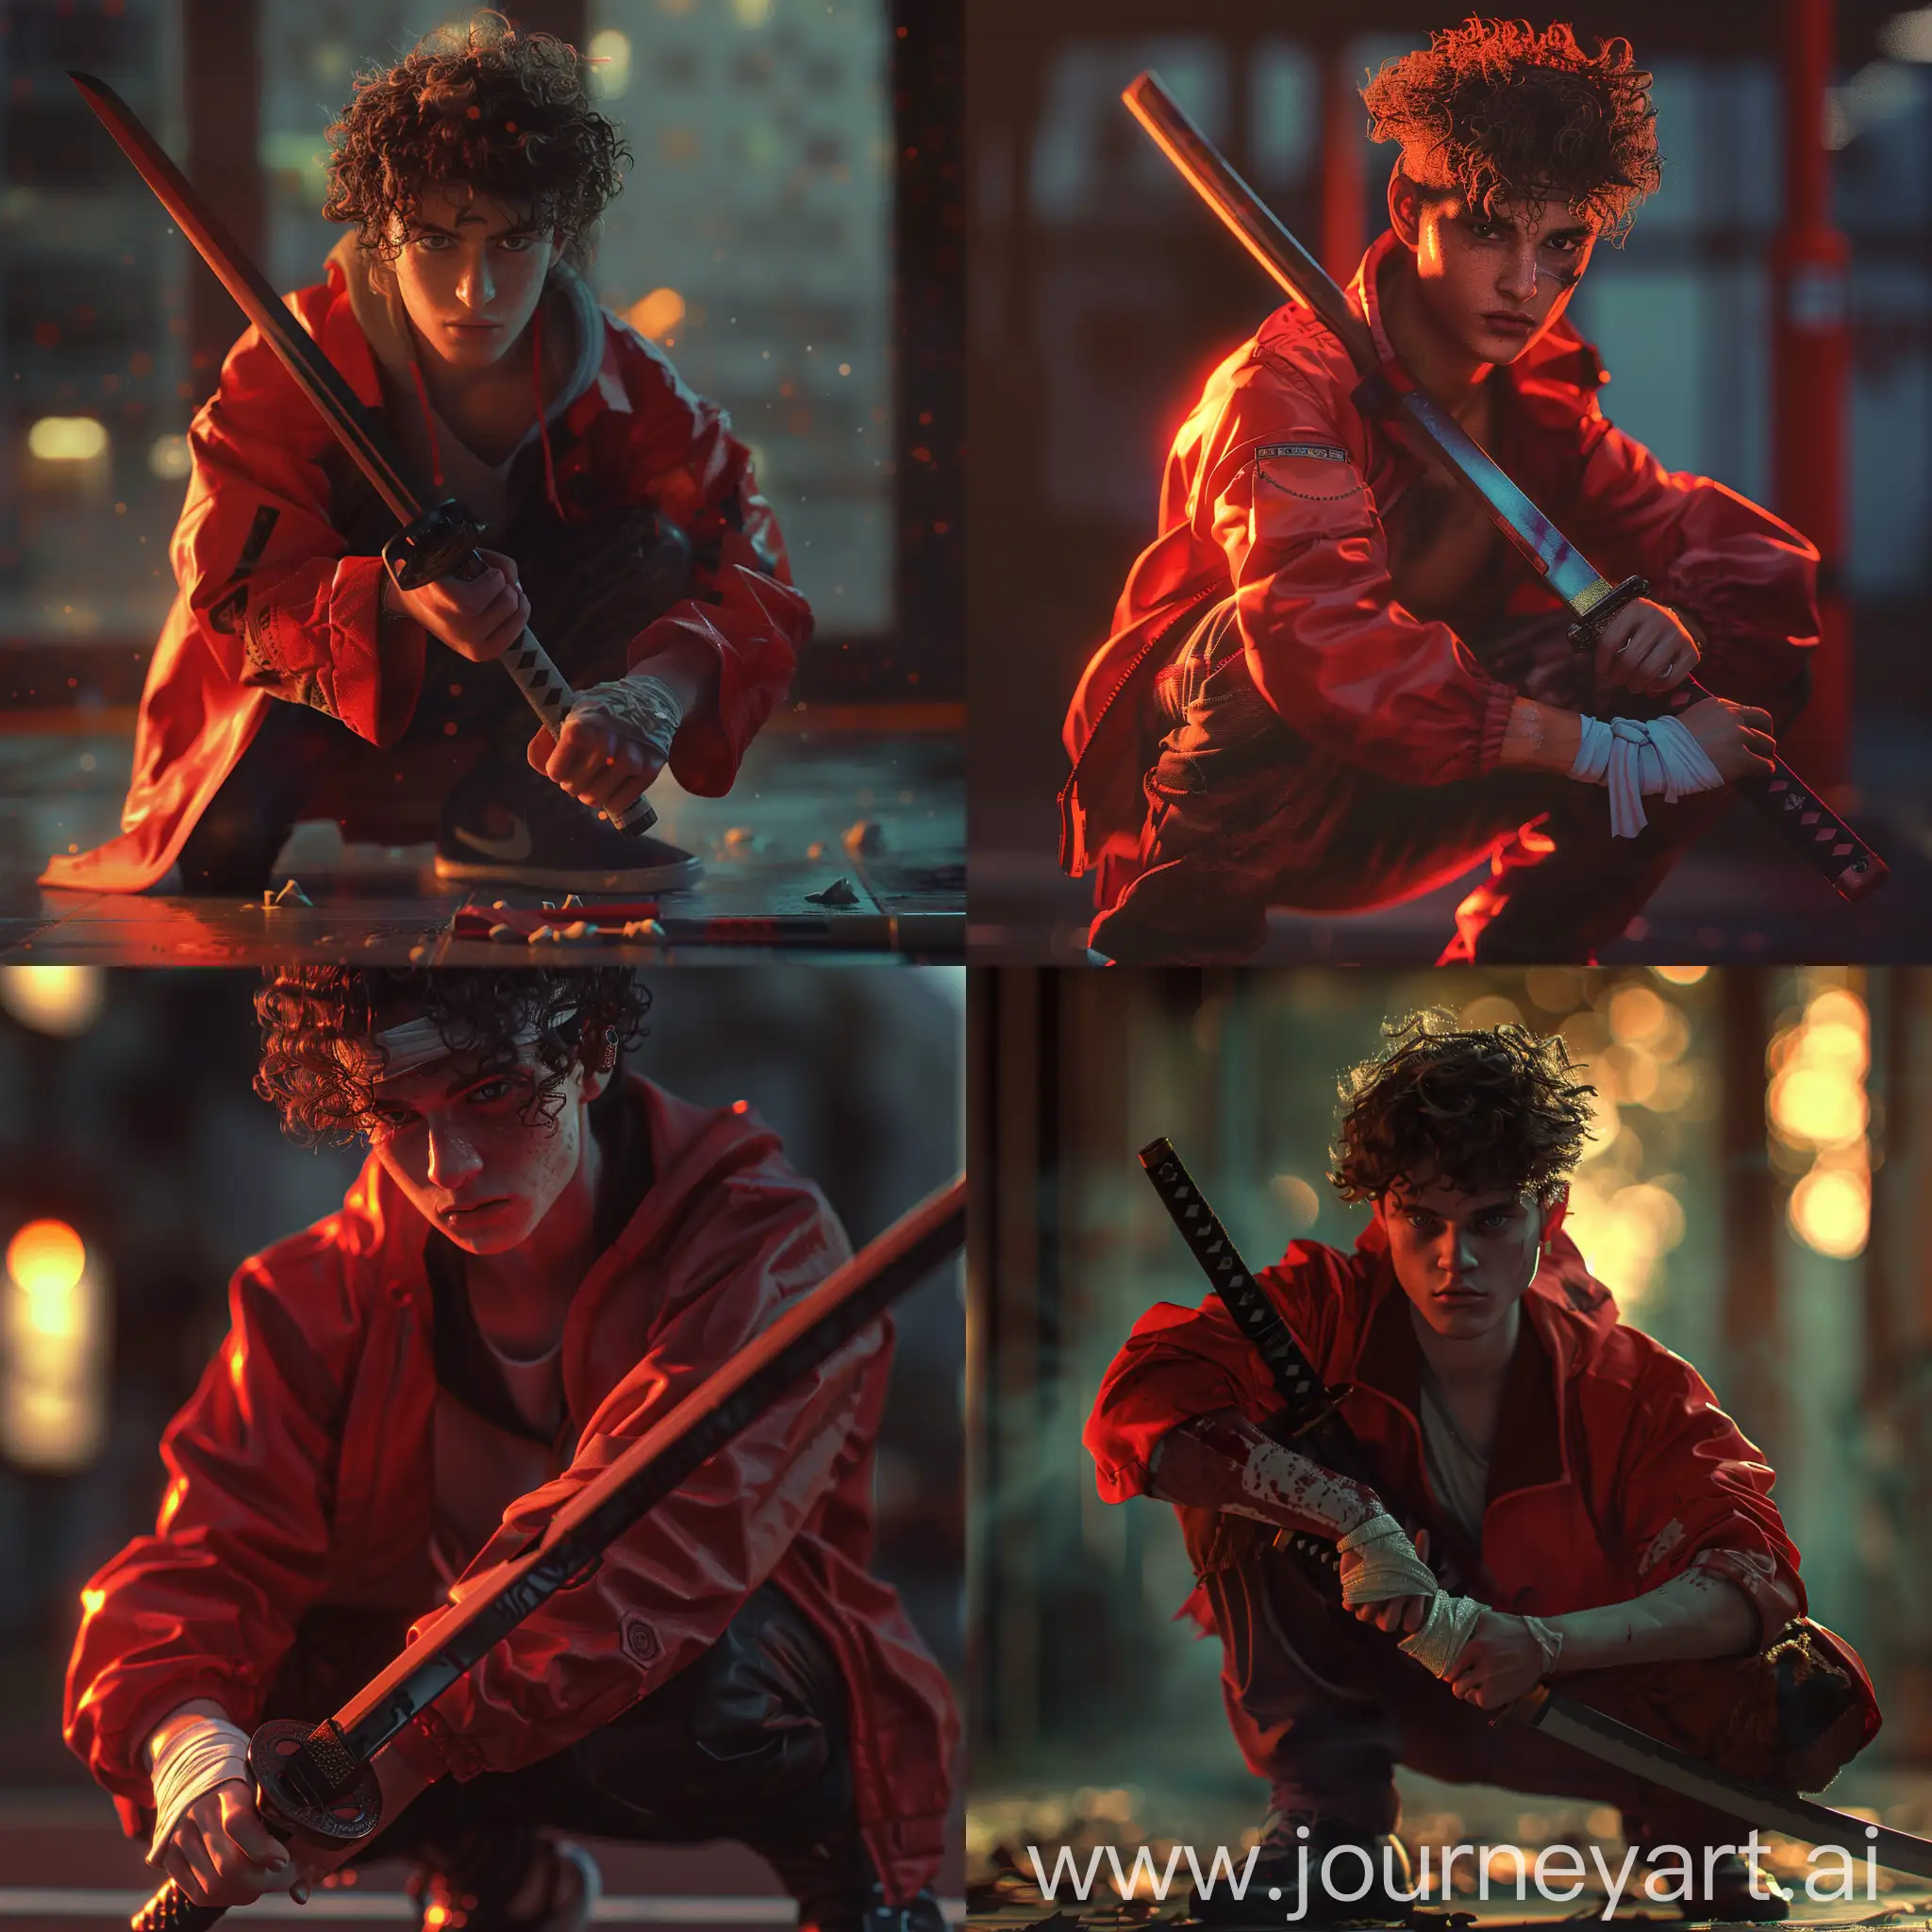 A young guy, squatting down, holding a katana, curly hair, handsome, looking at the camera, hands in bandages, red jacket, in synthwave style, soft light, blurred background, using warm reds, oranges and blacks, 3d blender, 4k